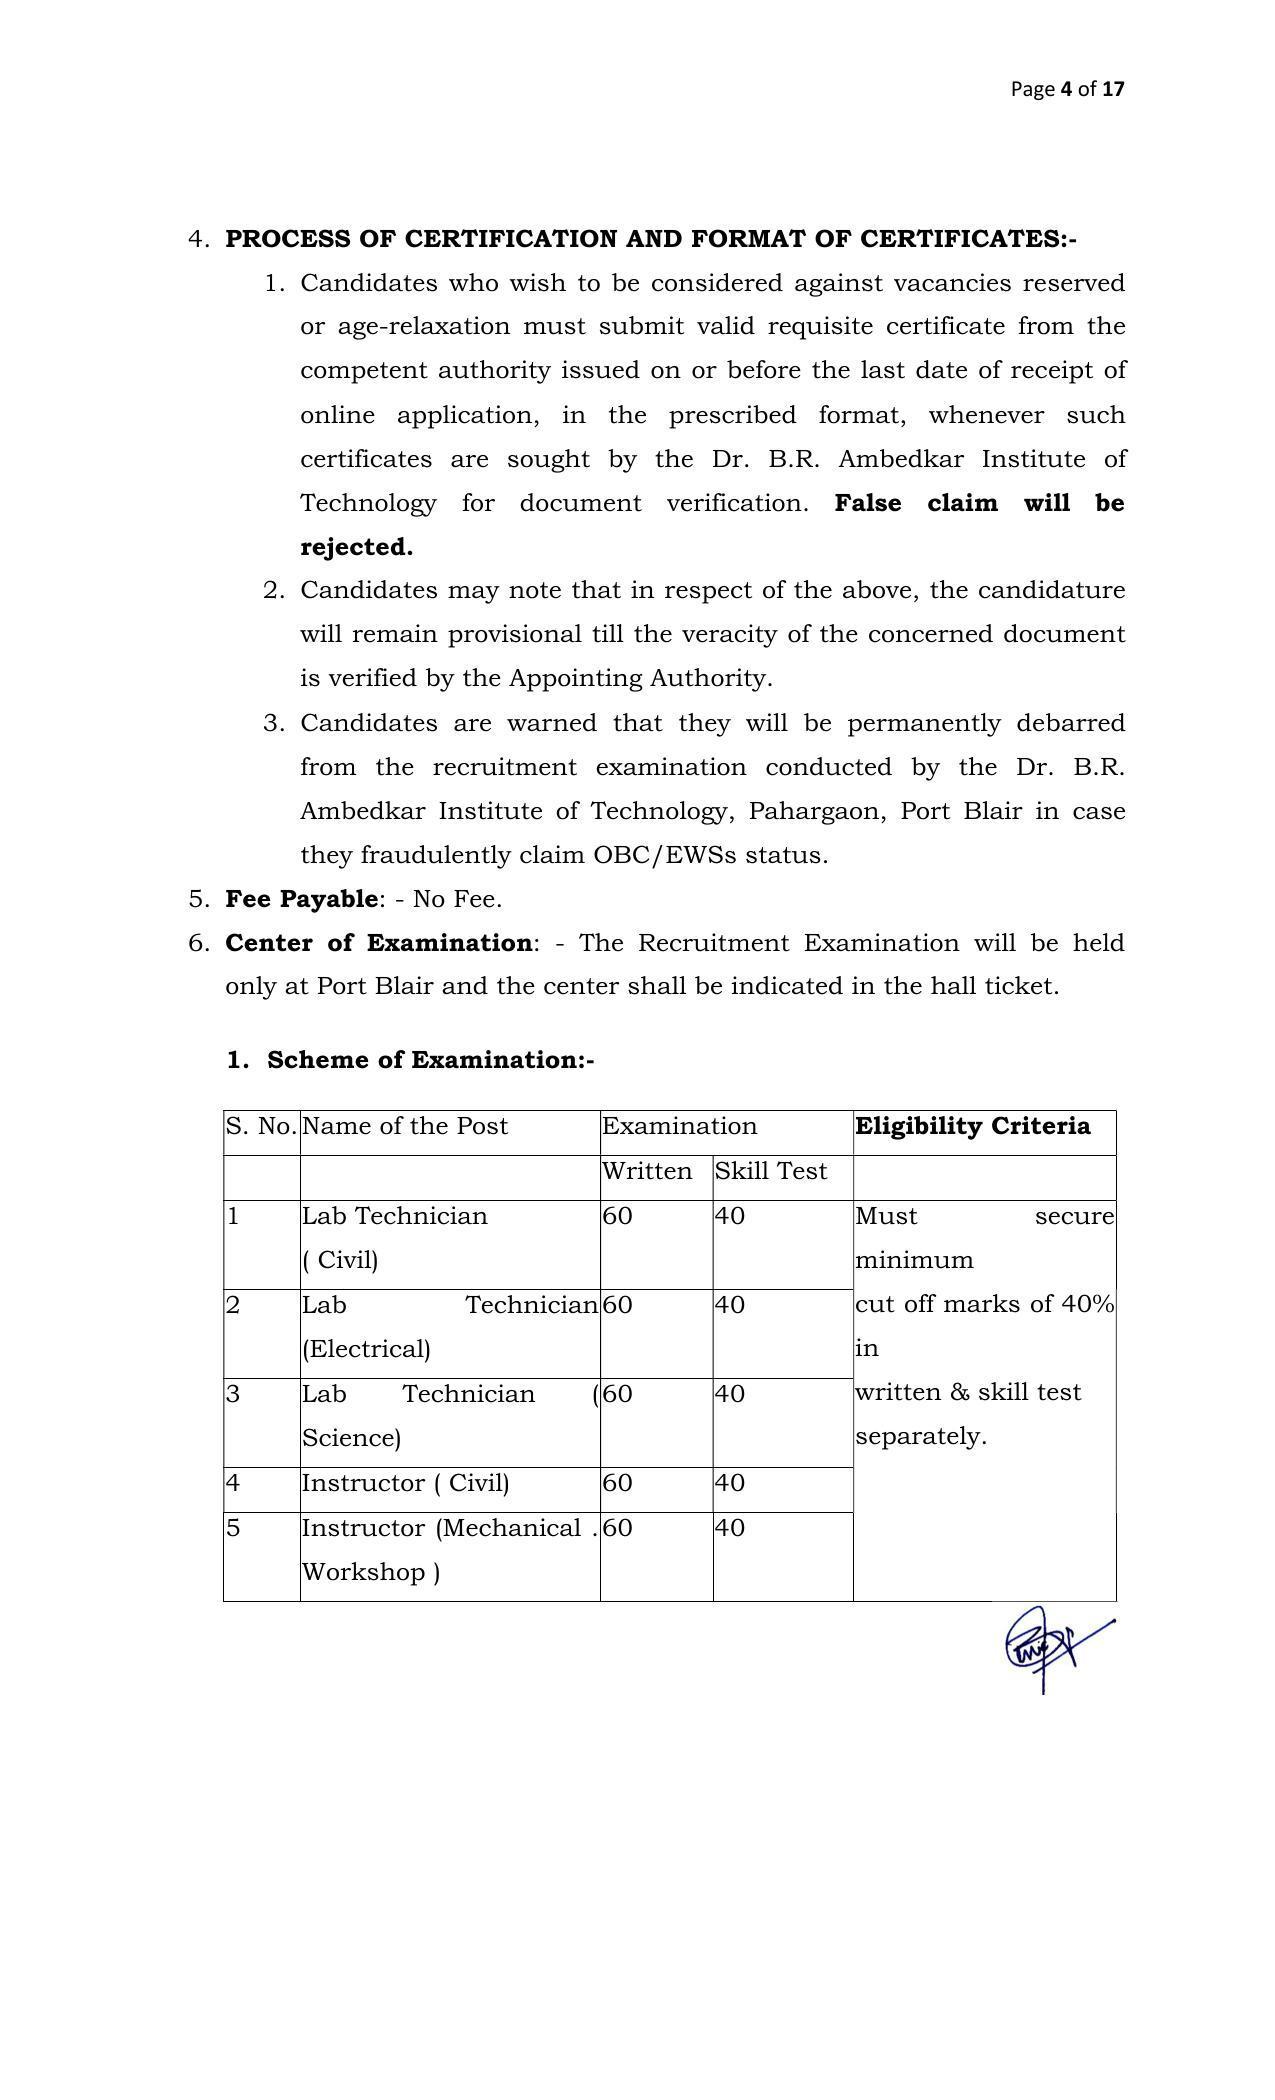 DBRAIT Invites Application for Lab Technician, Instructor Recruitment 2022 - Page 16